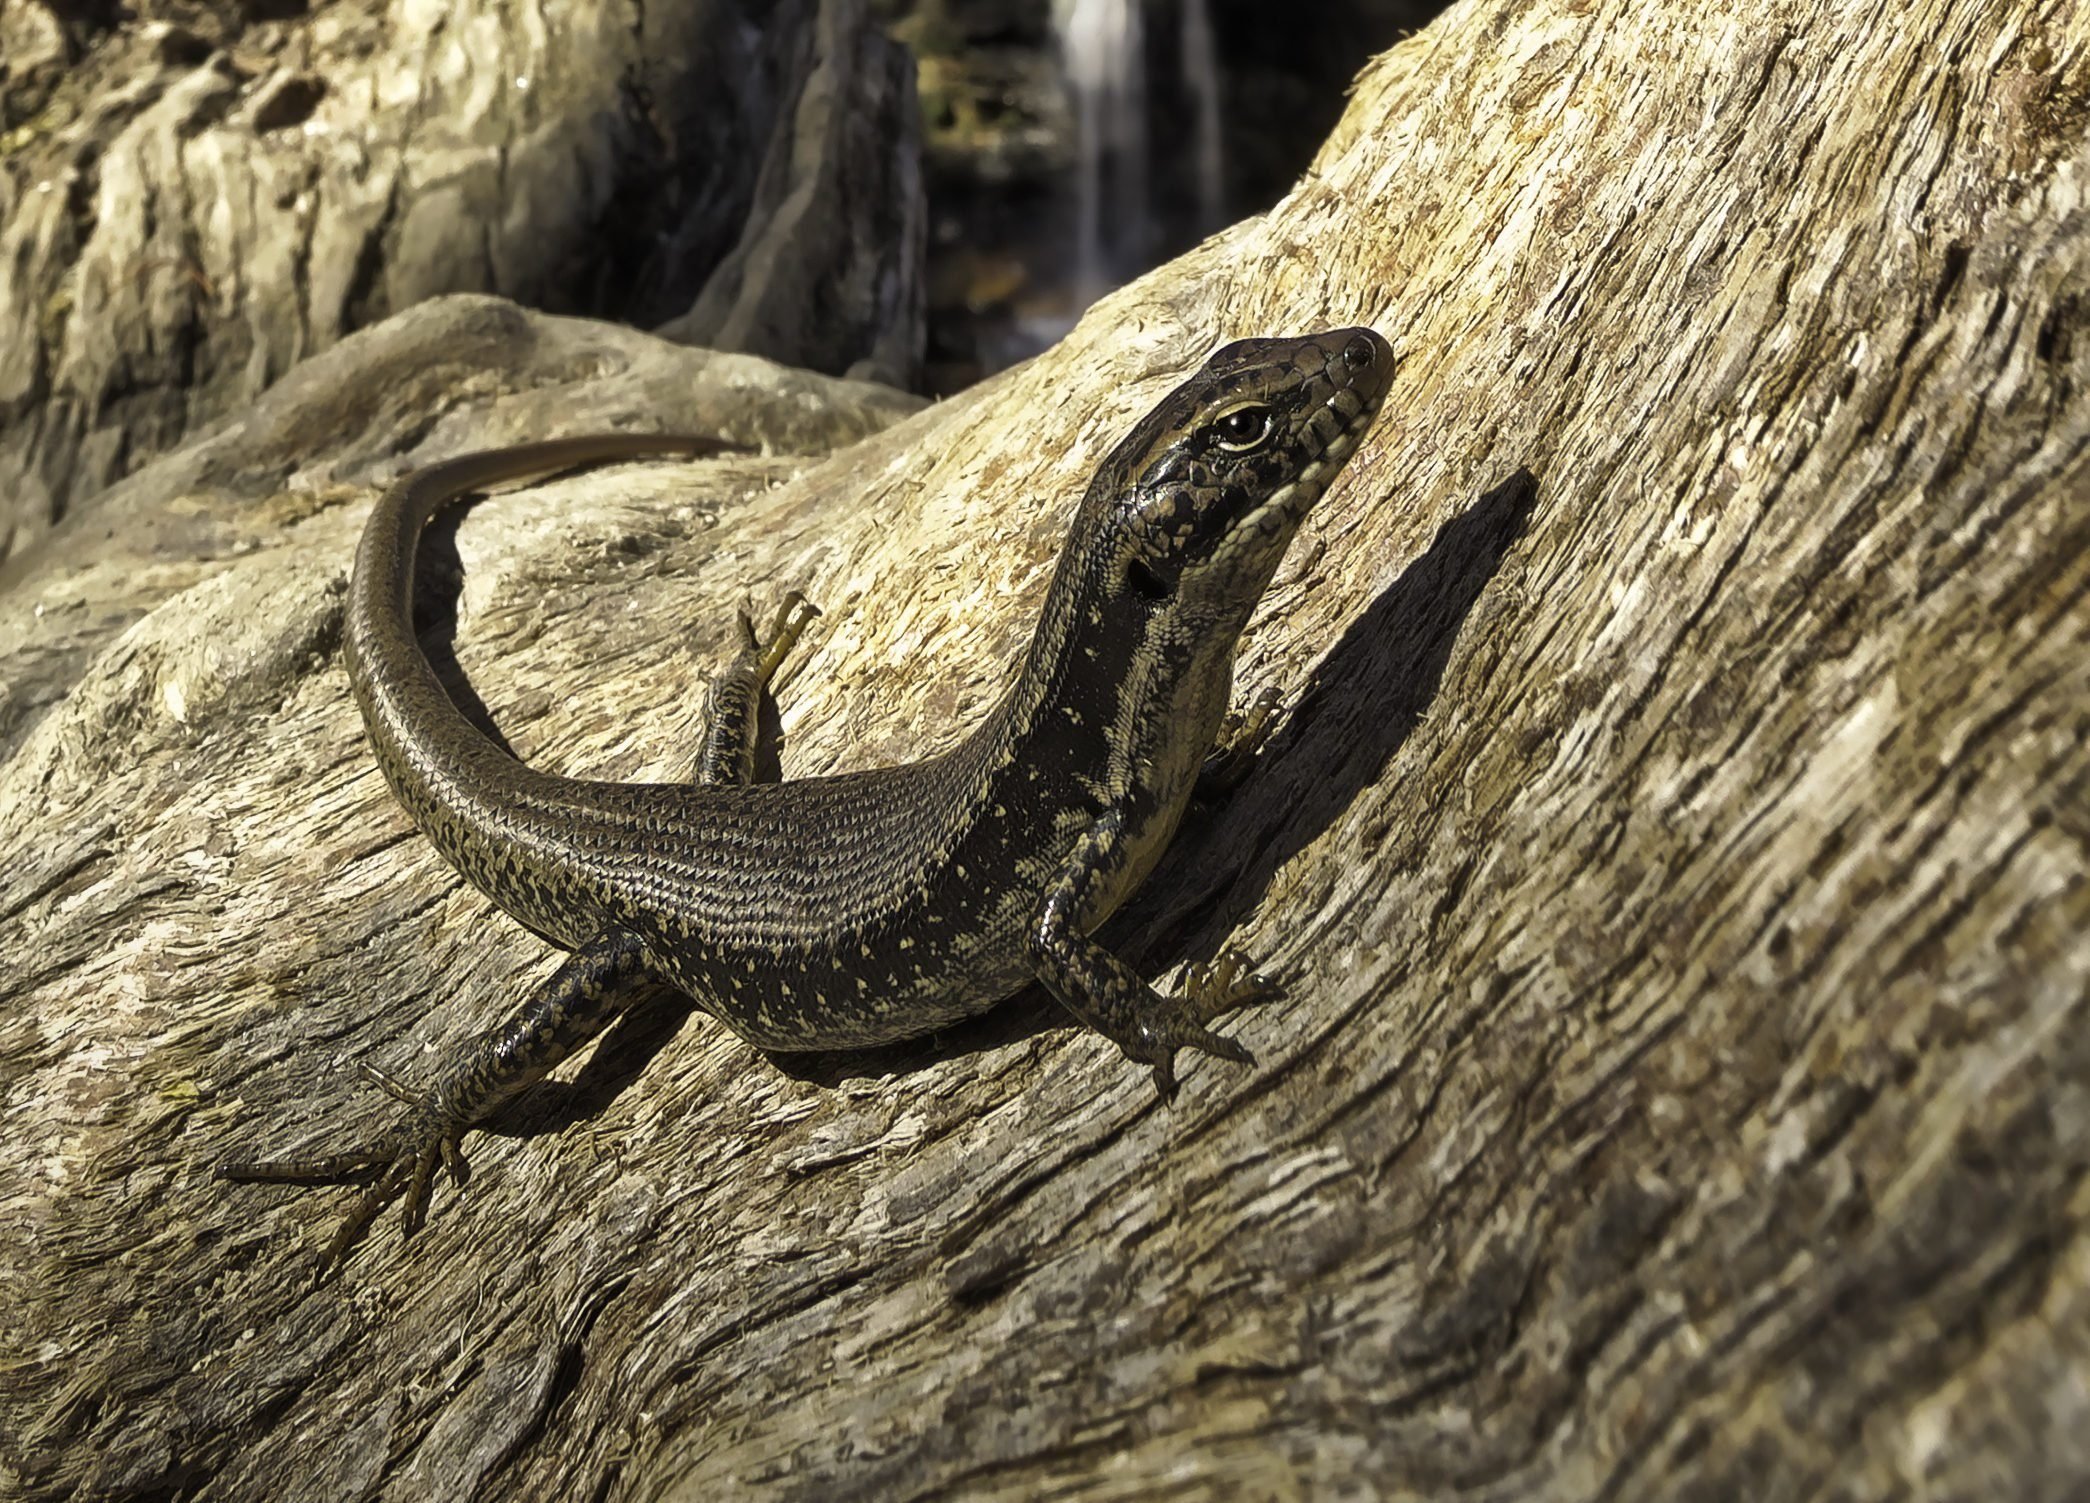 Water Skink (Eulamprus quoyii)